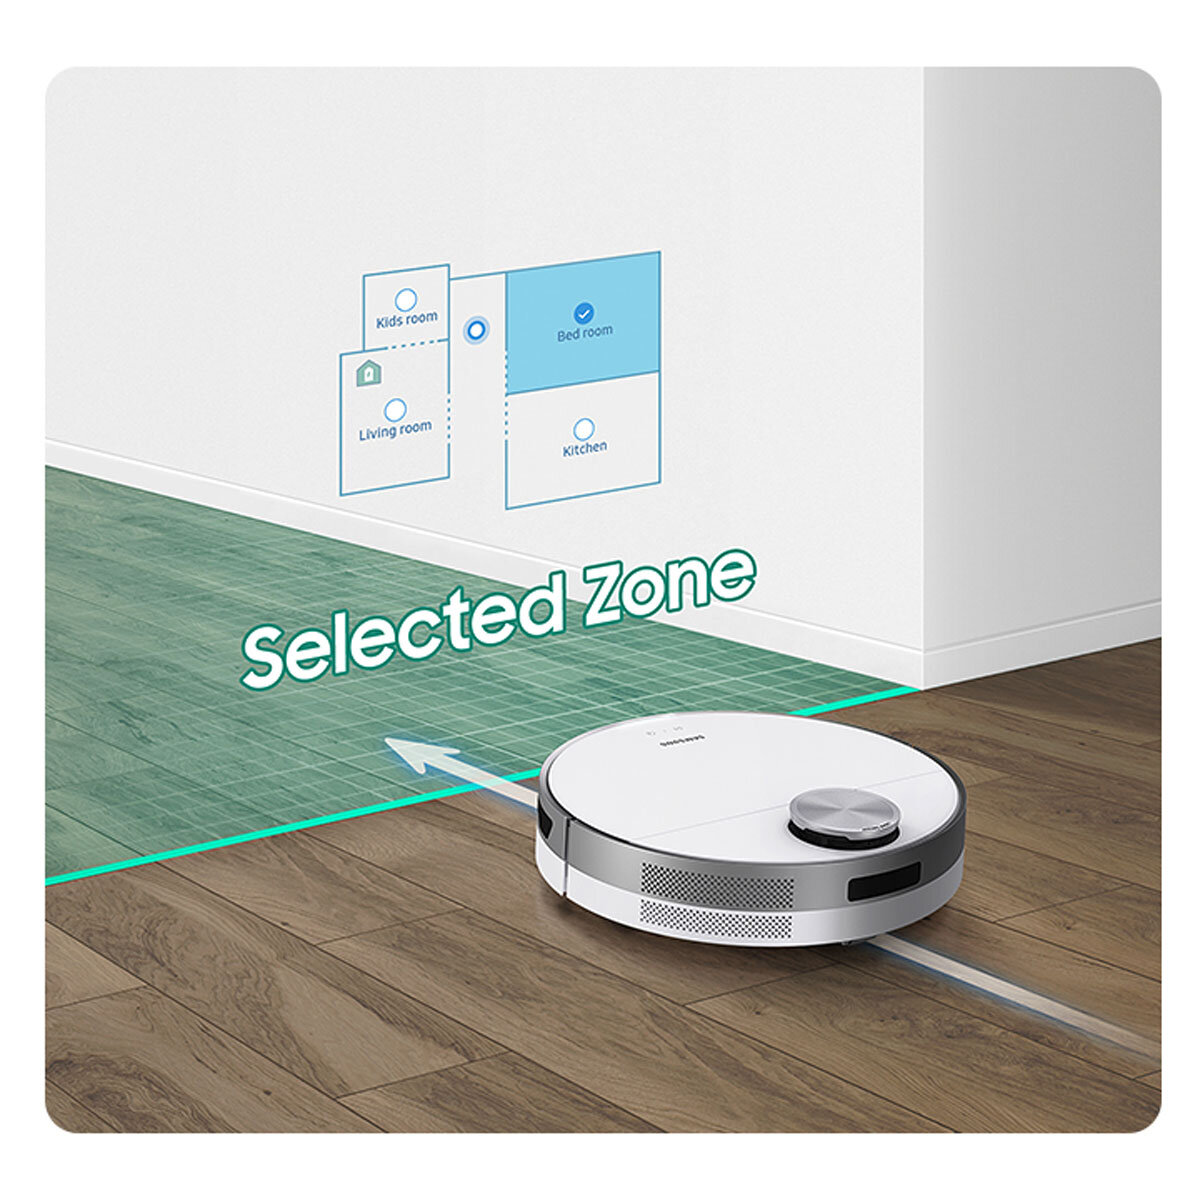 Lifestyle image of Samsung Robotic Vac showing selected zone mode